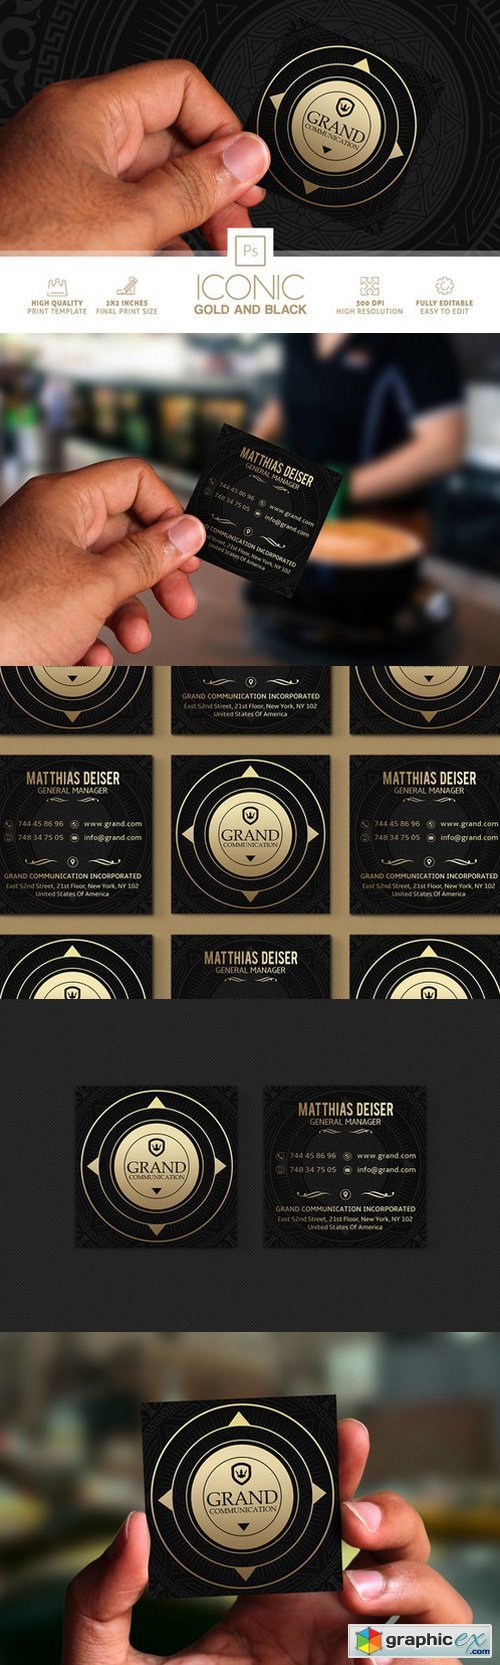 Iconic Gold And Black Business Card